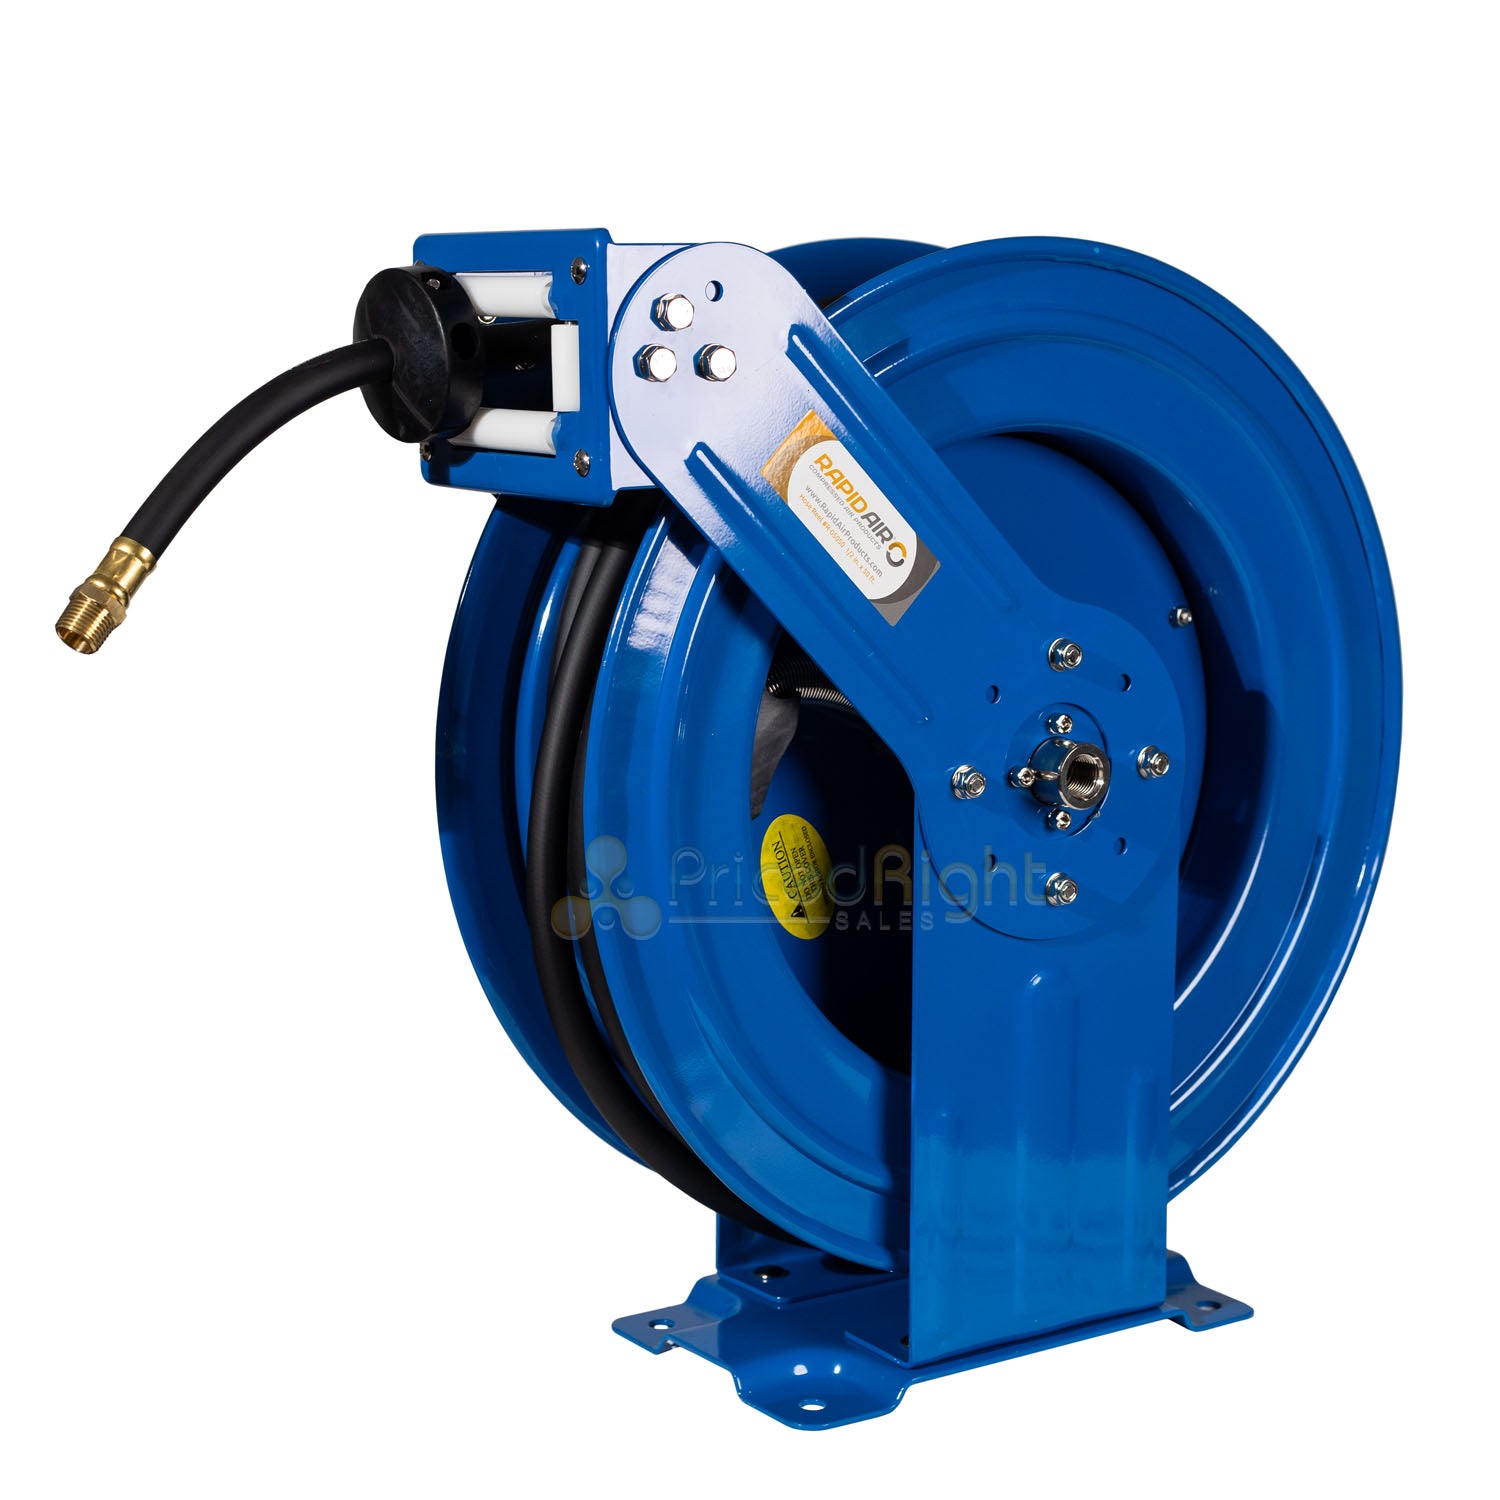 Rapidair 1/2 x 50' Dual Arm Steel Hose Reel 1/2 Inlet and Outlet R-05050  Rapidair 1/2 x 50' Dual Arm Steel Hose Reel 1/2 Inlet and Outlet R-05050